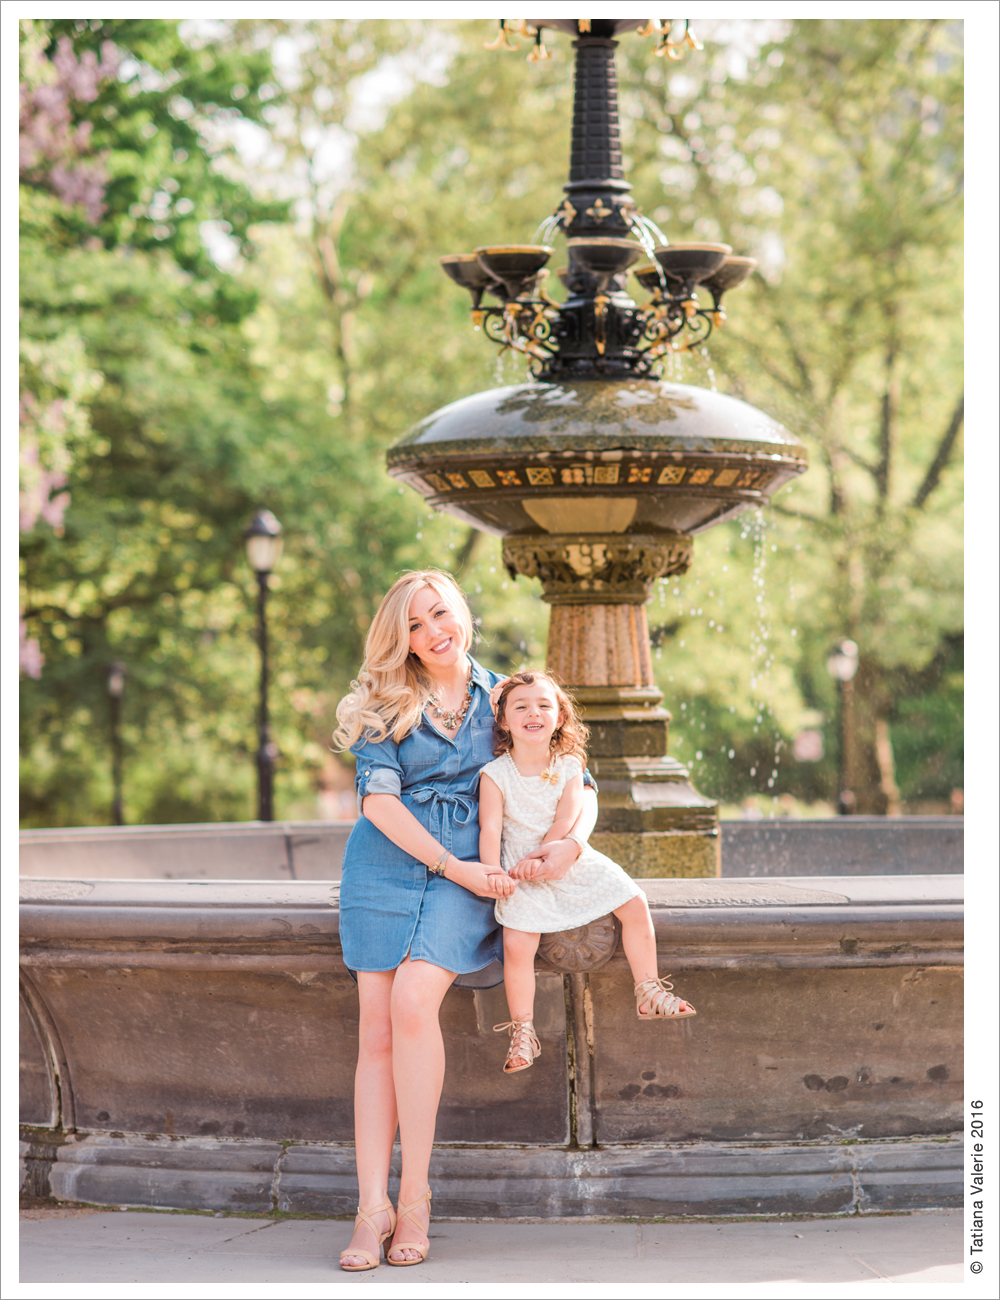 Mother-Daughter Photo Session in Central Park 2016